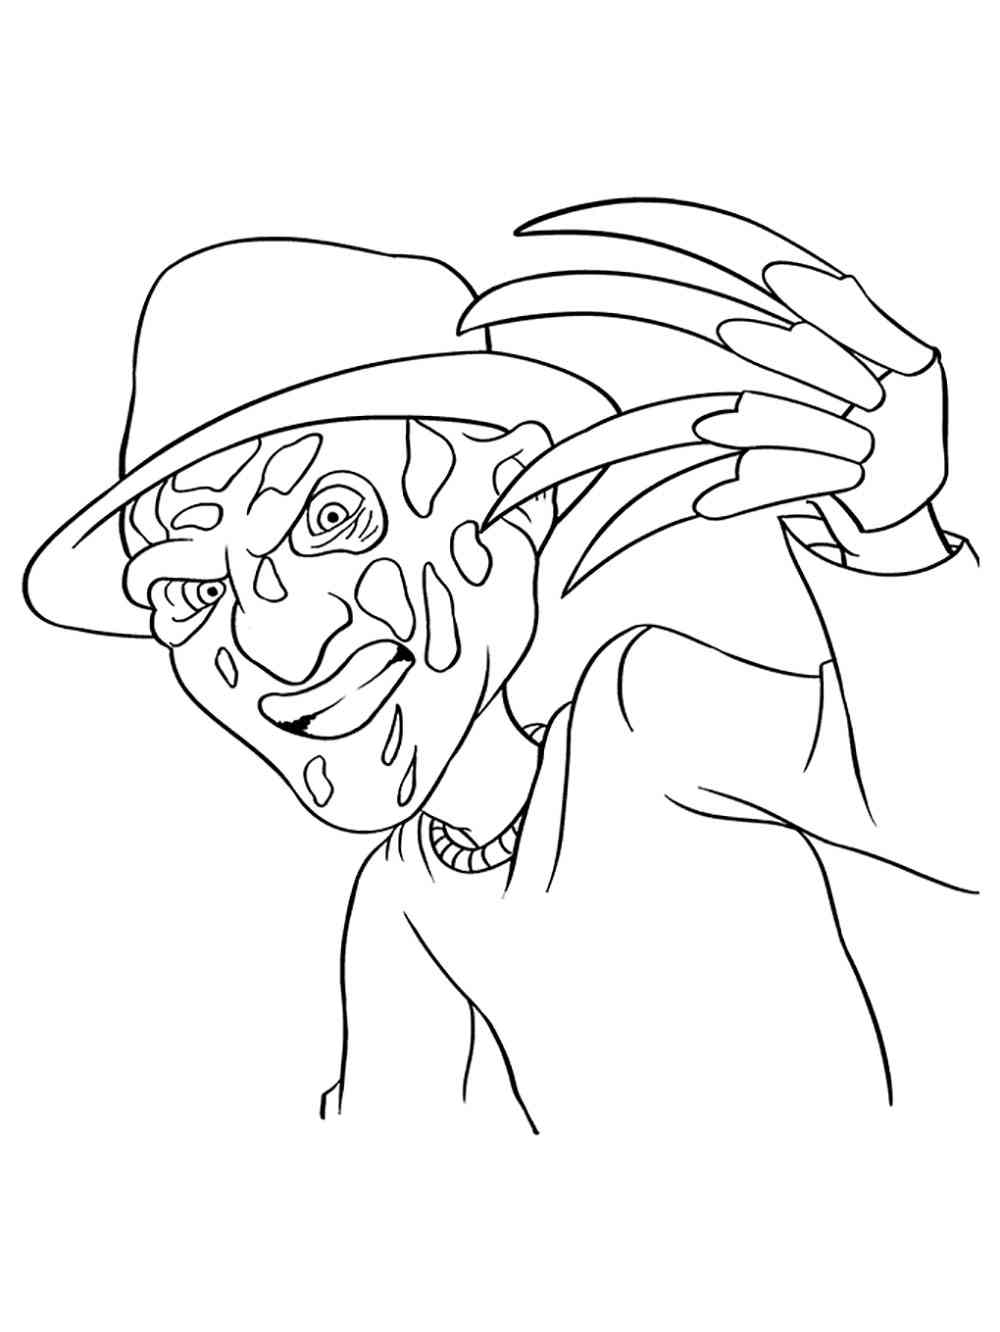 Free Freddy Krueger coloring pages. Download and print Freddy Krueger ...